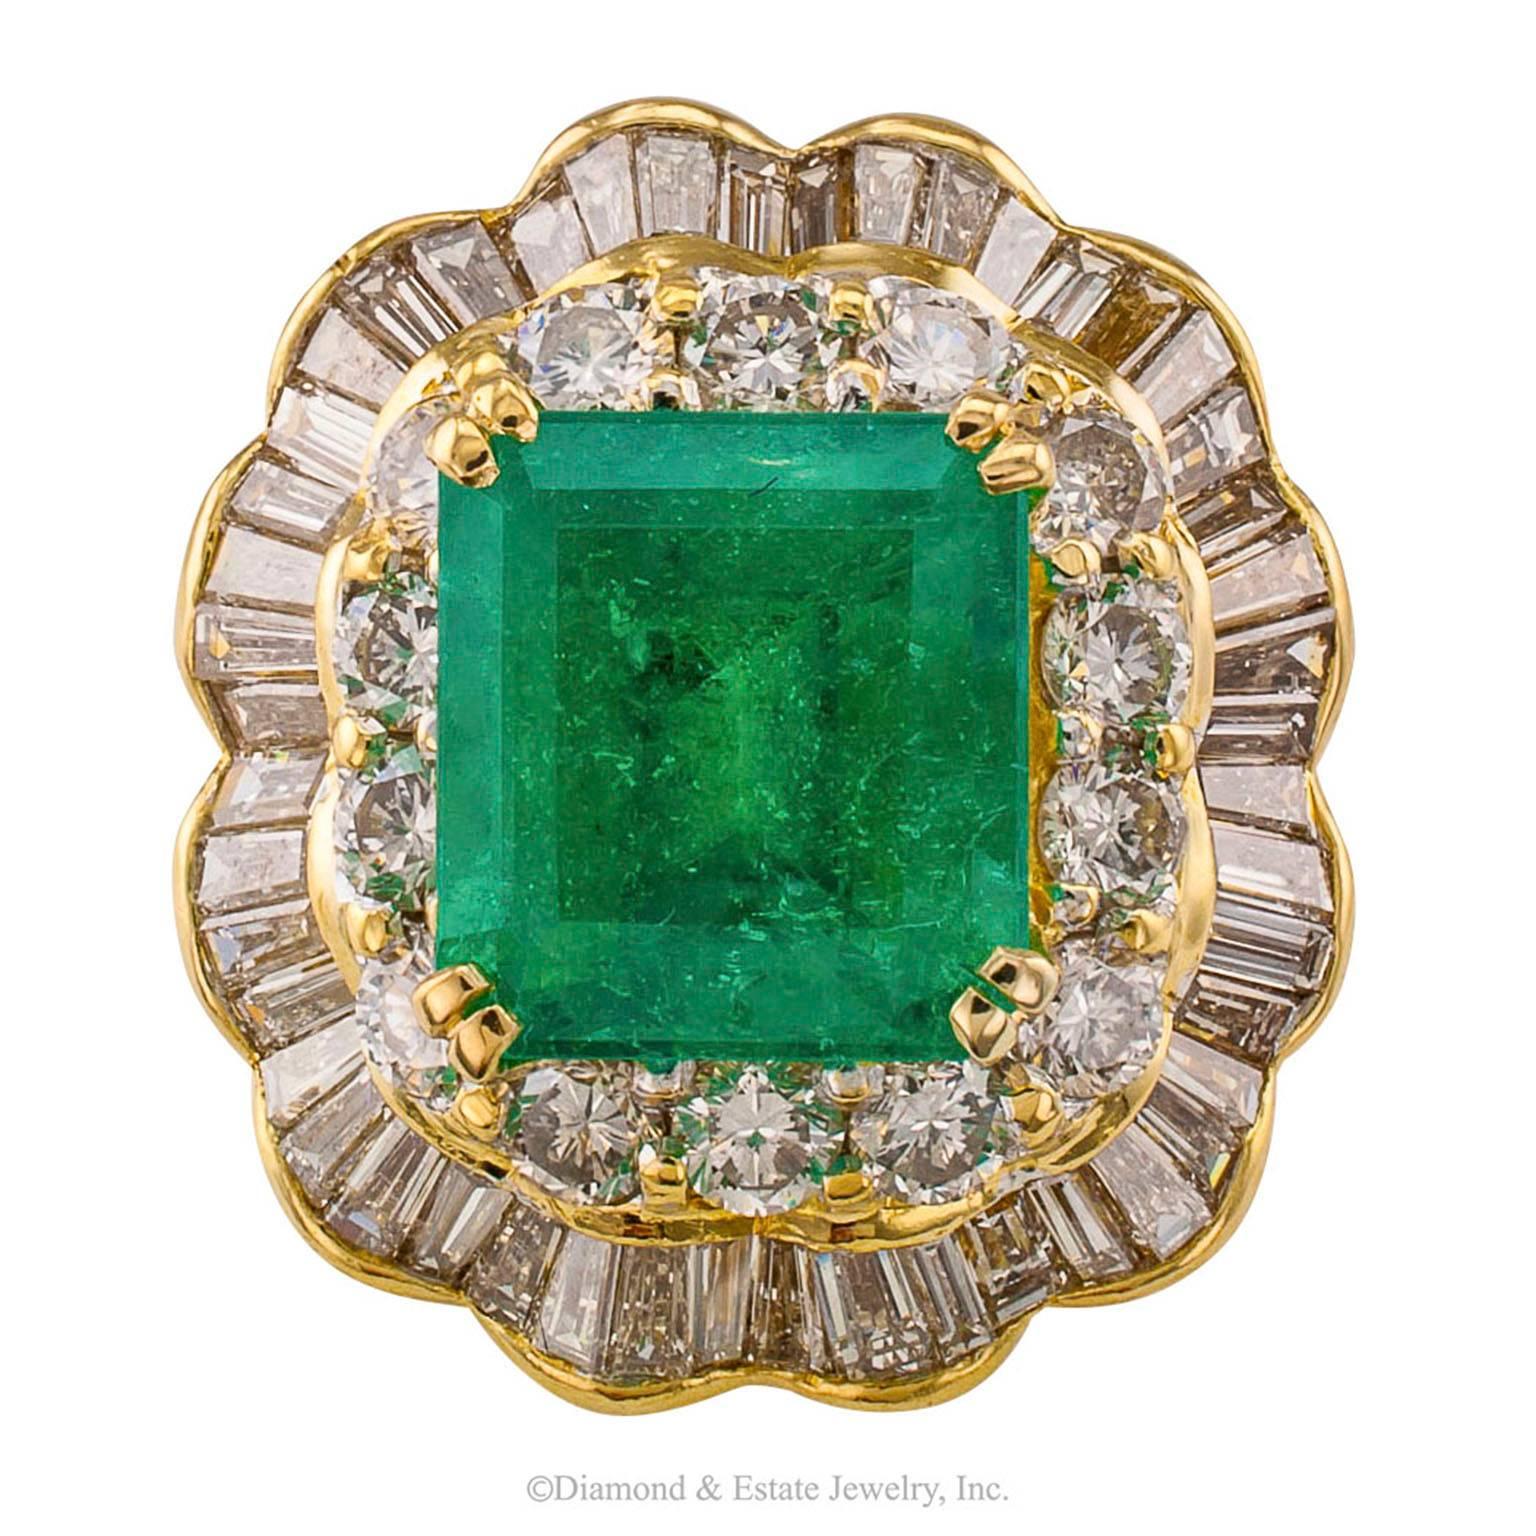 3.75 Carats Square-cut Emerald Diamond Cluster Ring

Square emerald-cut 3.75 carats emerald and diamond ring mounted in 18-karat yellow gold circa 1980.  One could say that this is a smaller scale cocktail ring, but it is no shrinking violet.  The